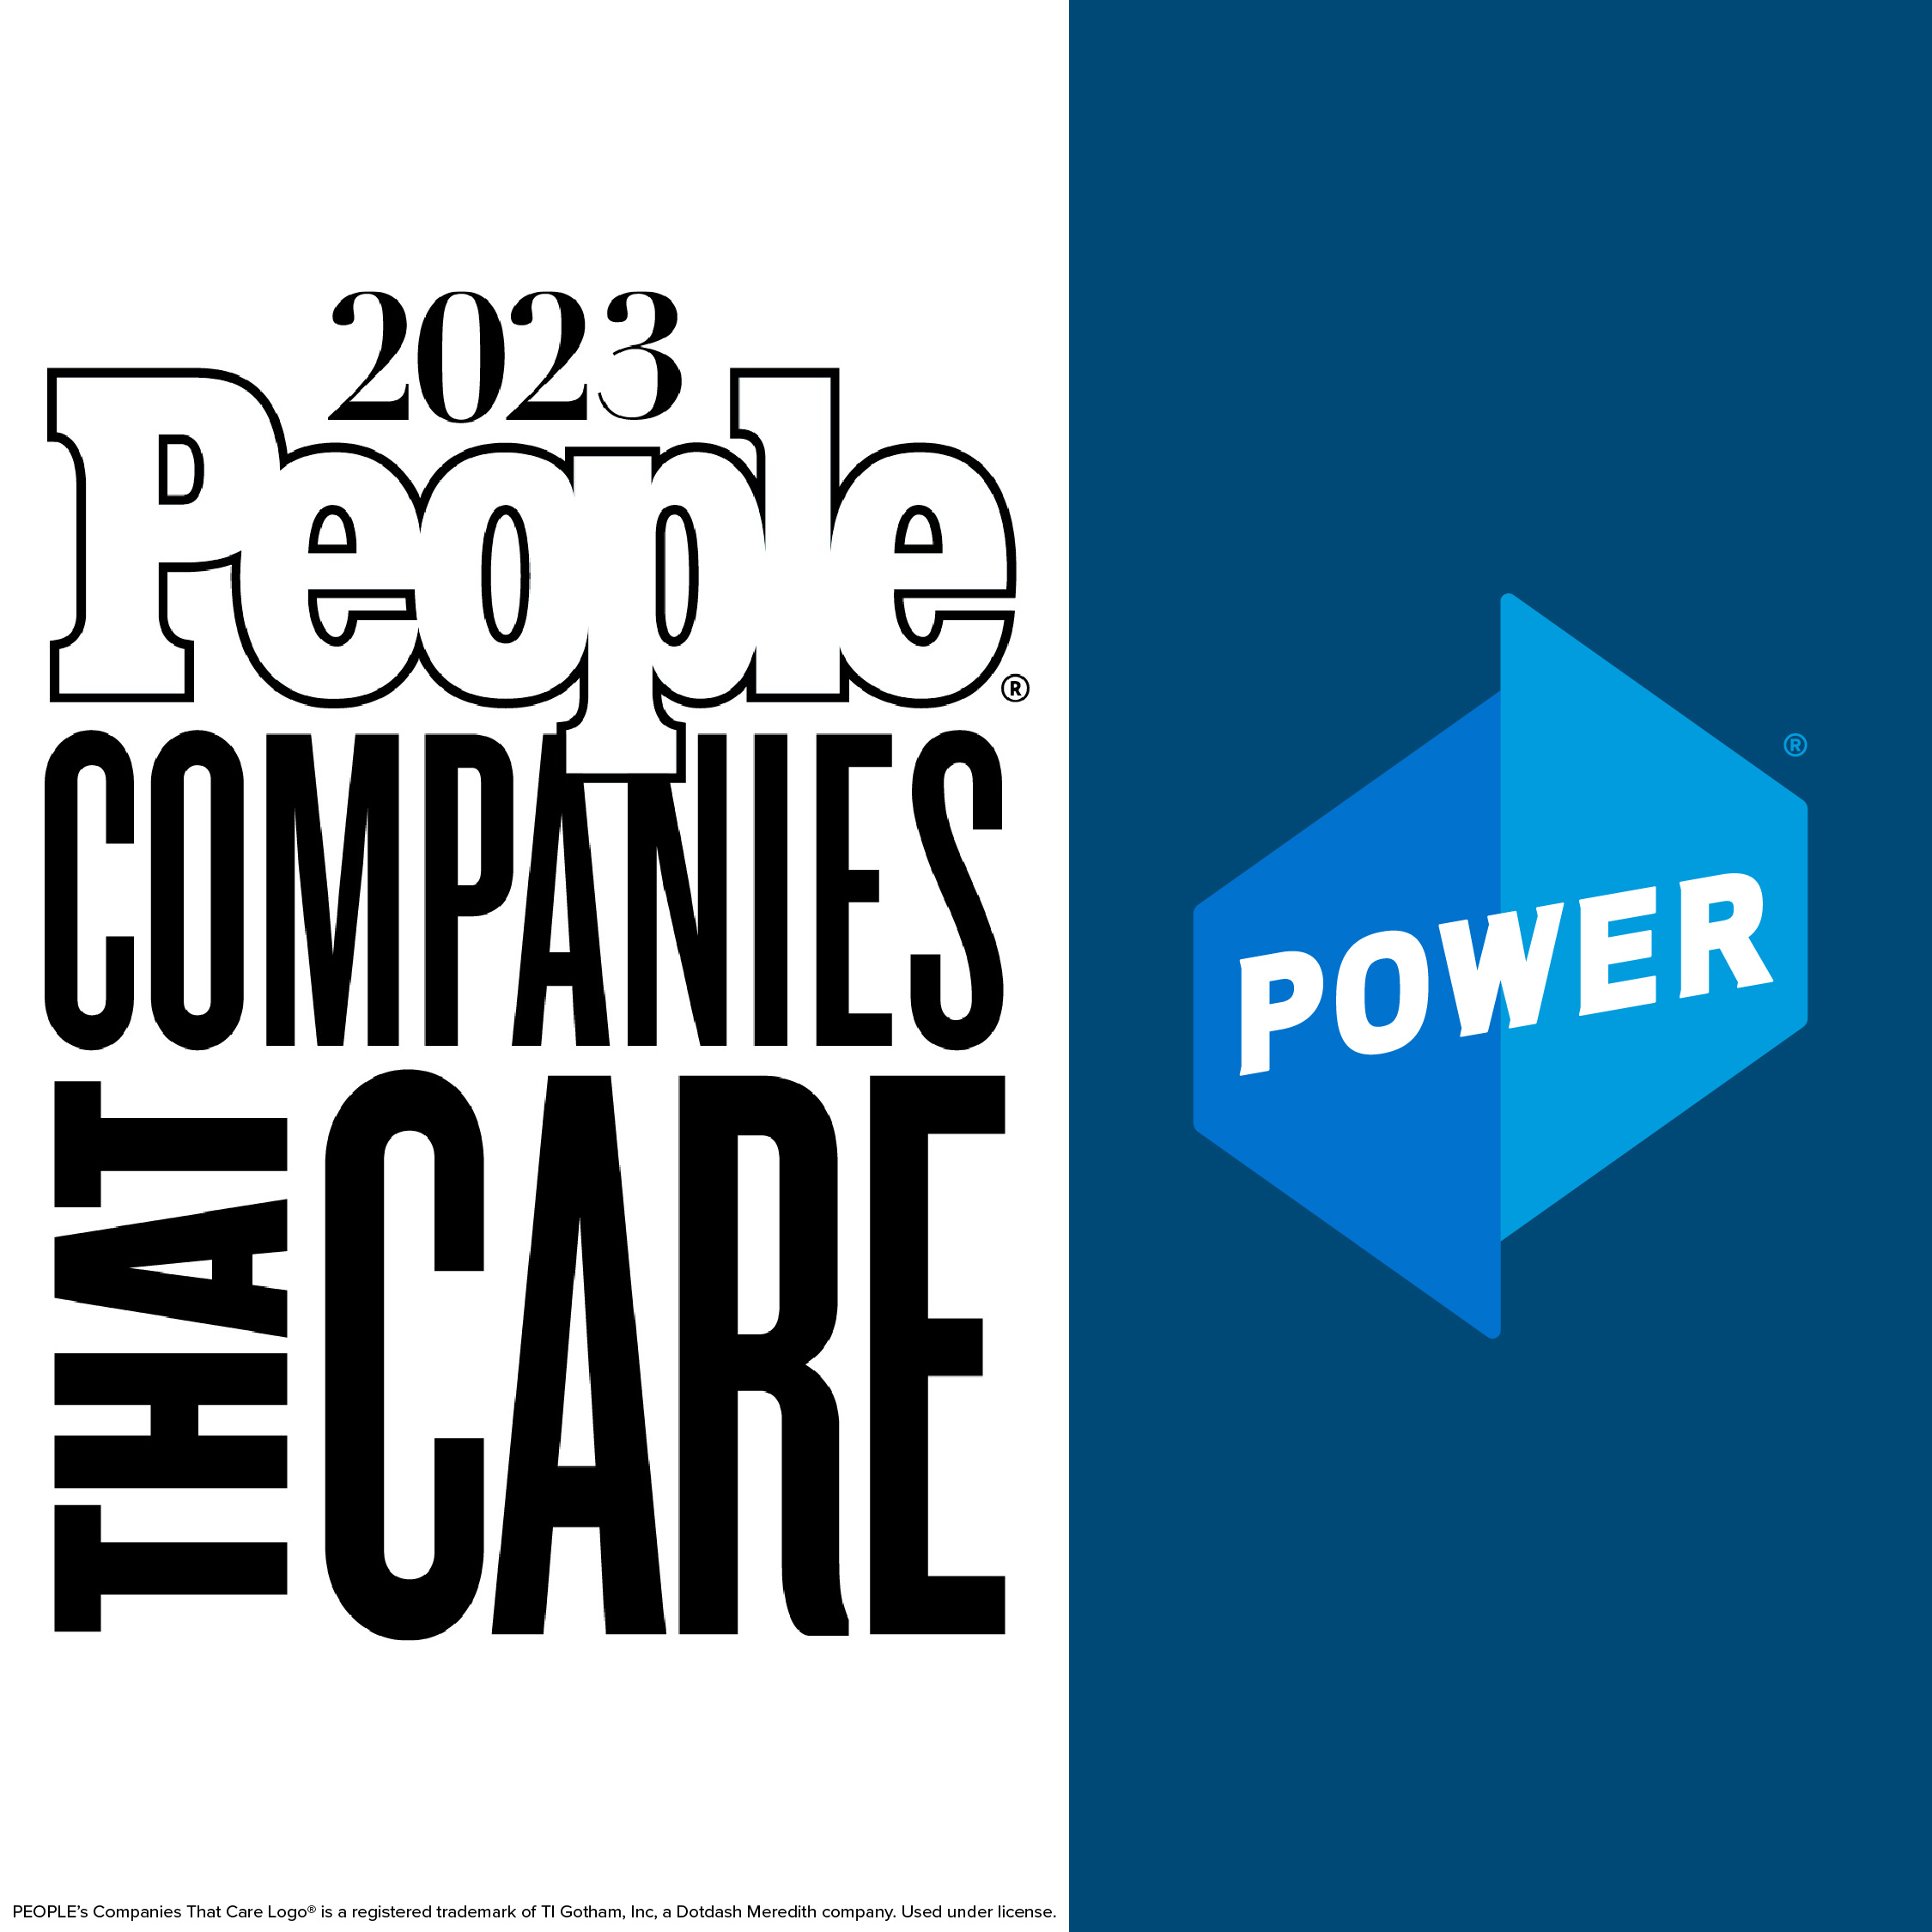 Power Home Remodeling Earns Spot on 2023 PEOPLE Companies That Care® List